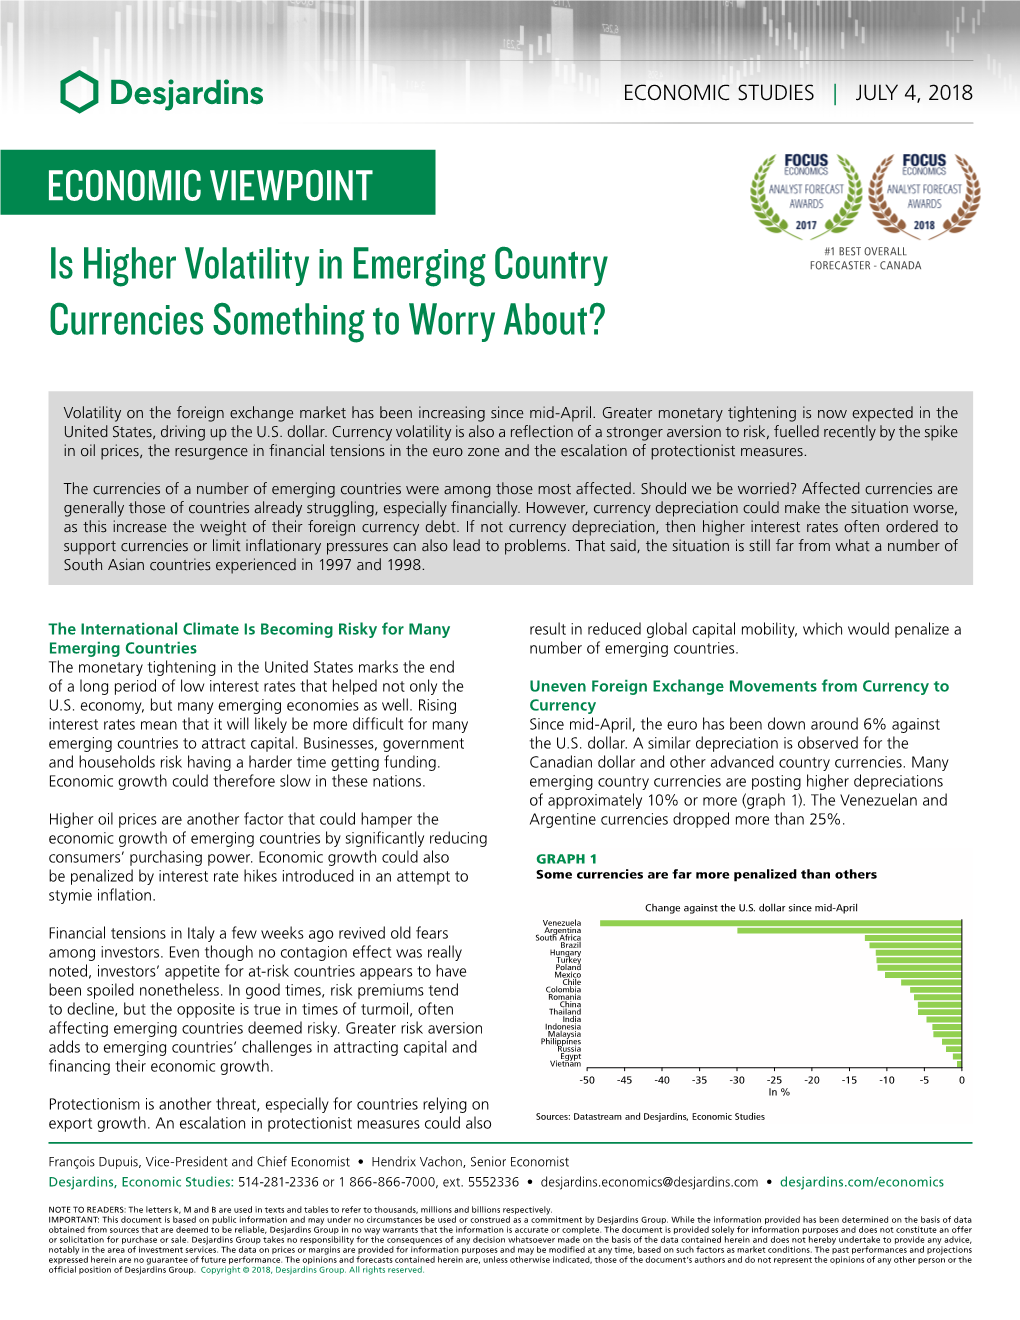 Is Higher Volatility in Emerging Country Currencies Something To